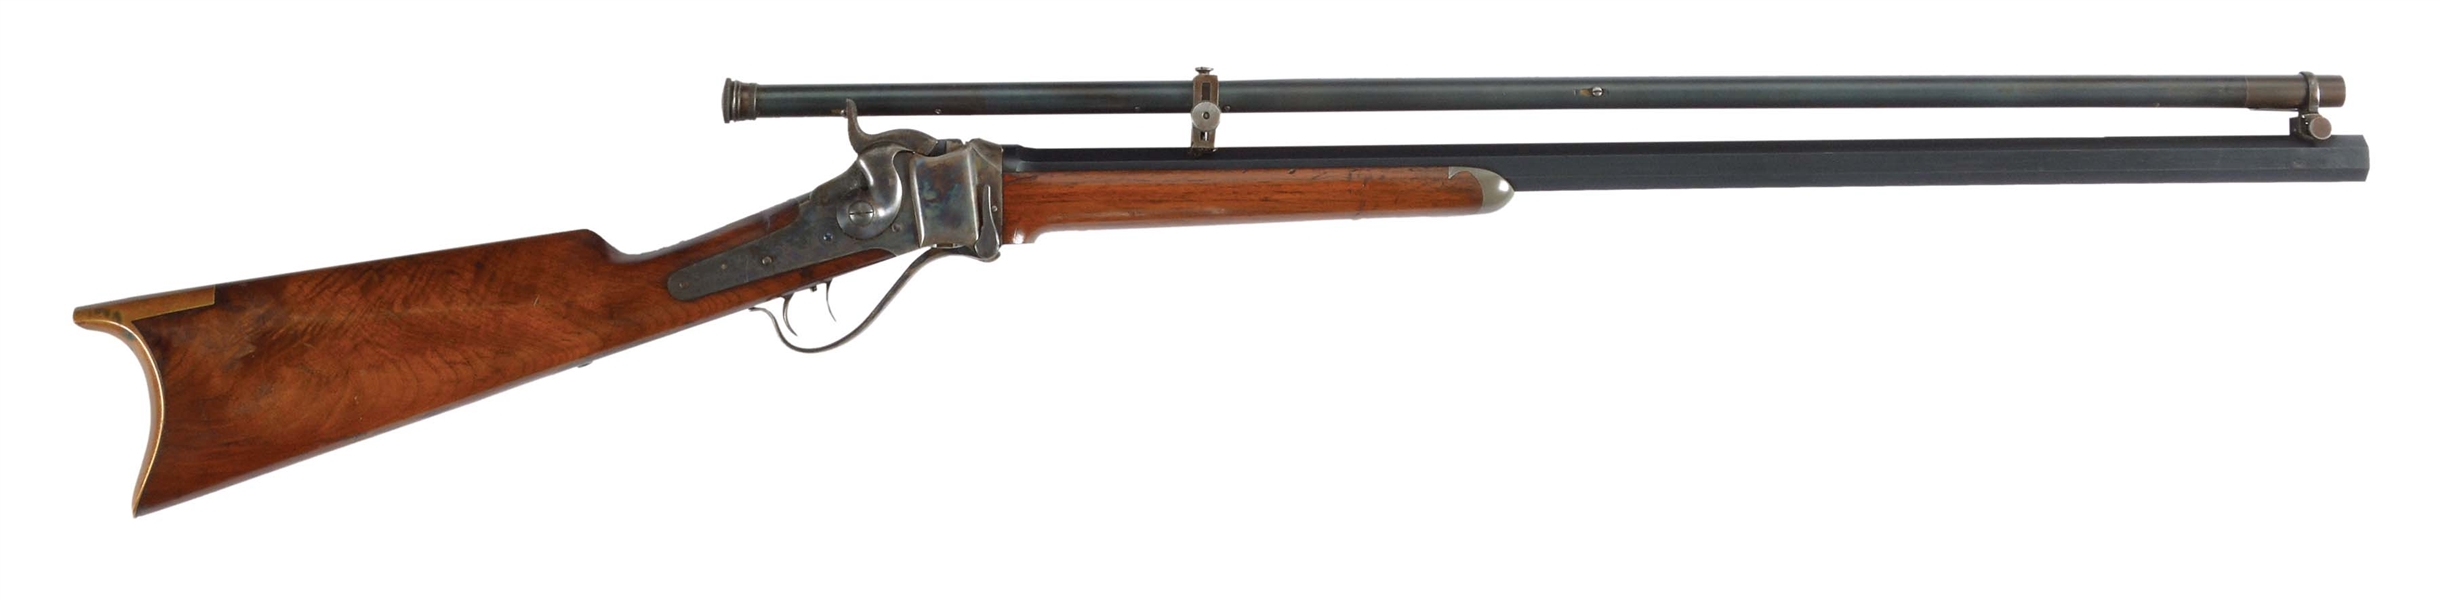 (A) SHARPS MODEL 1874 SPORTING RIFLE MADE FOR GEORGE H. PENFIELD, THE FIRST PRESIDENT OF THE SHARPS MANUFACTURING COMPANY.